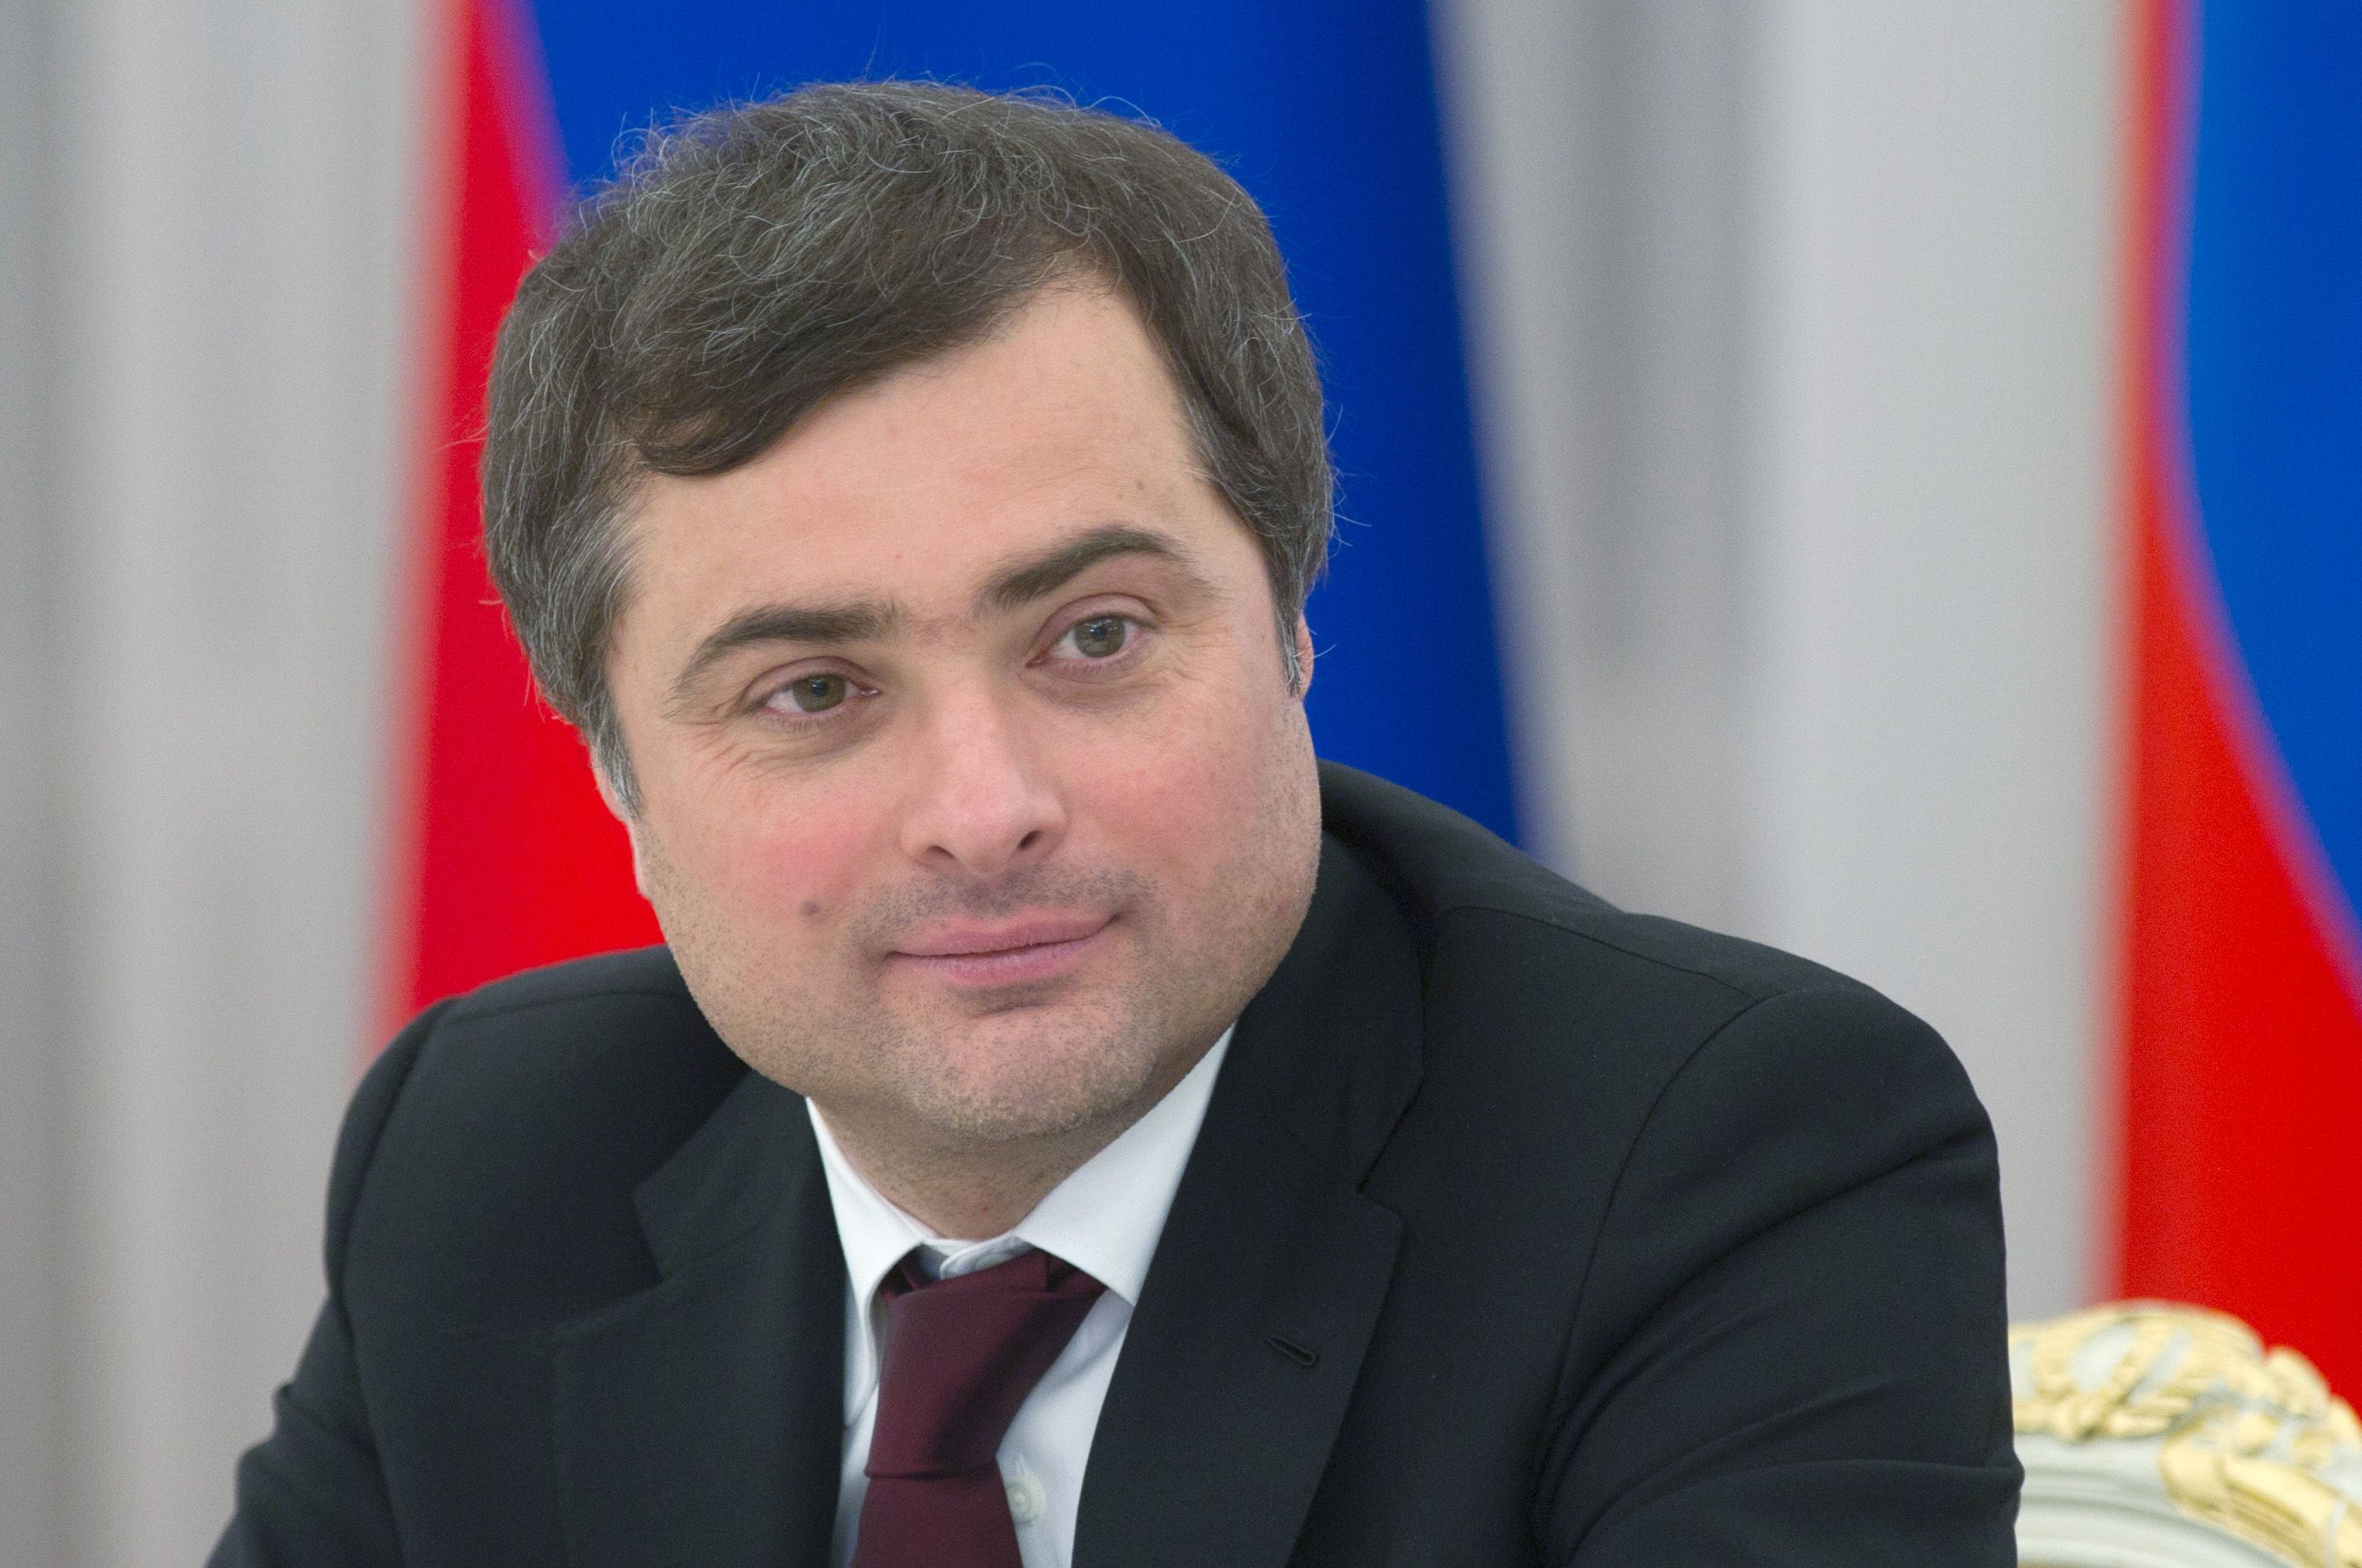 In February 2012, Vladislav Surkov was the Deputy Prime Minister at the time.